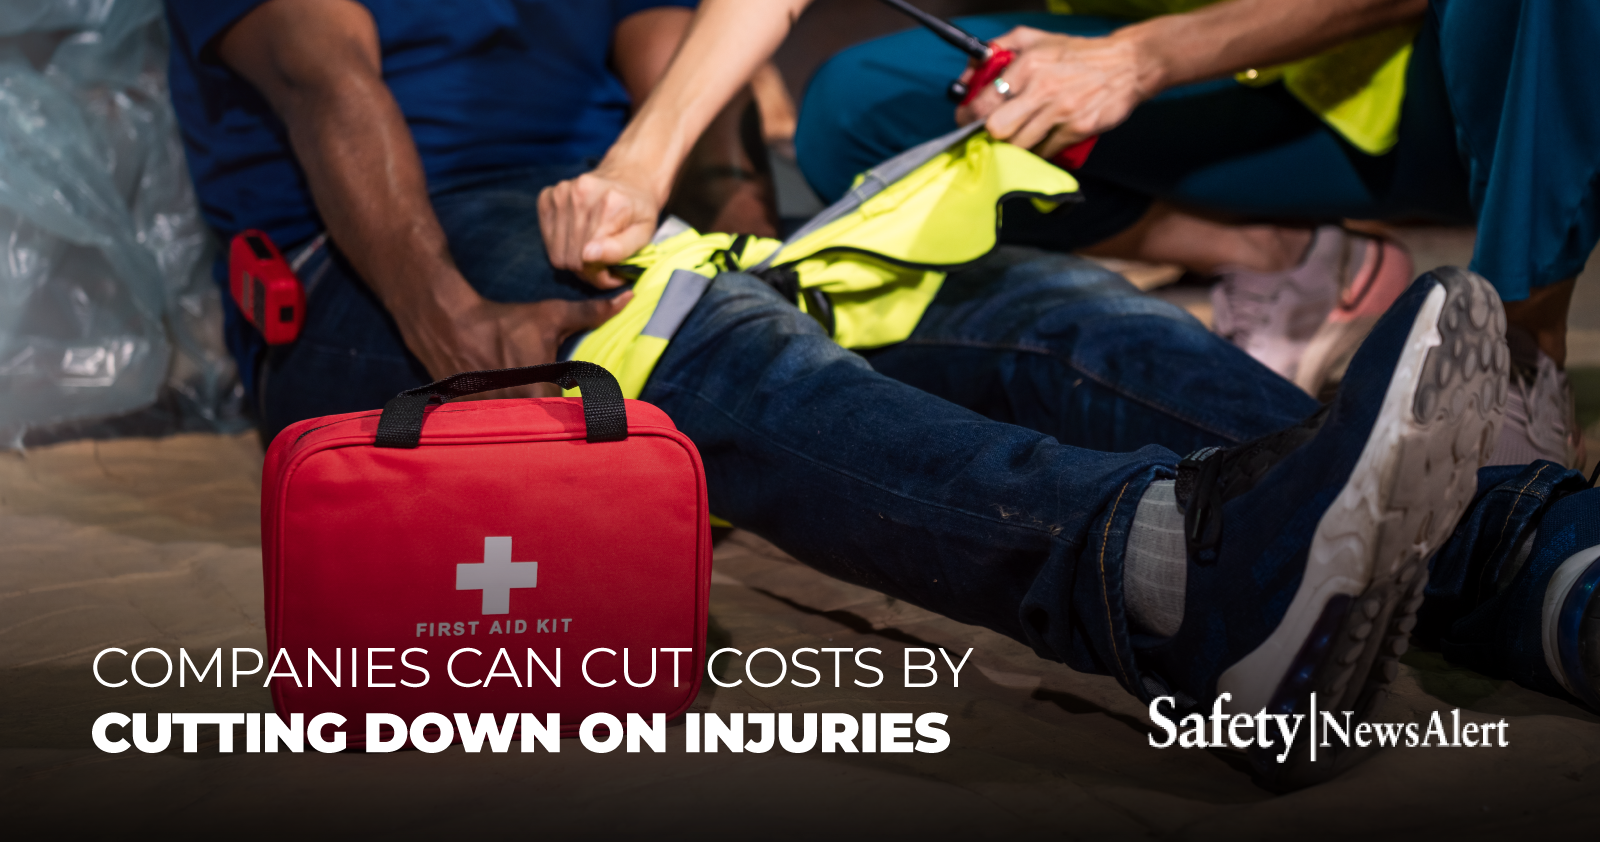 Companies can cut costs by cutting down on injuries